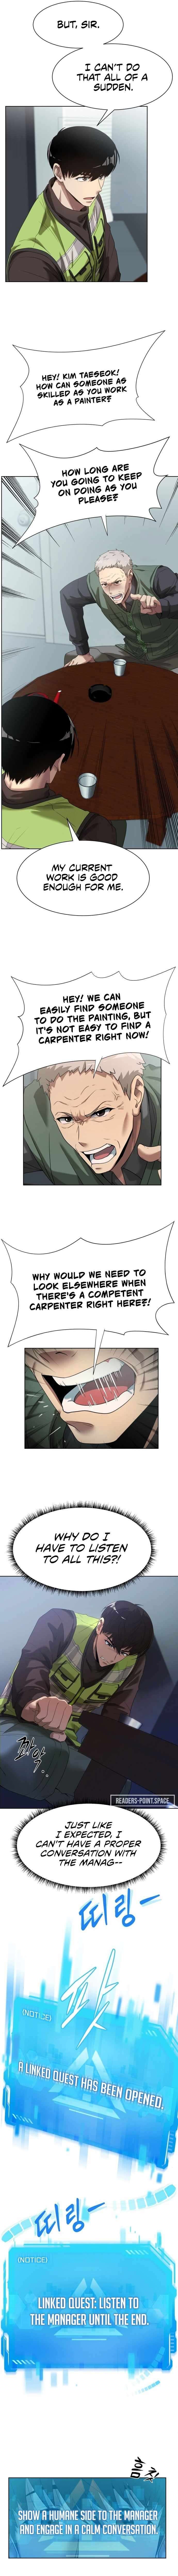 Becoming A Legendary Ace Employee Chapter 3 page 5